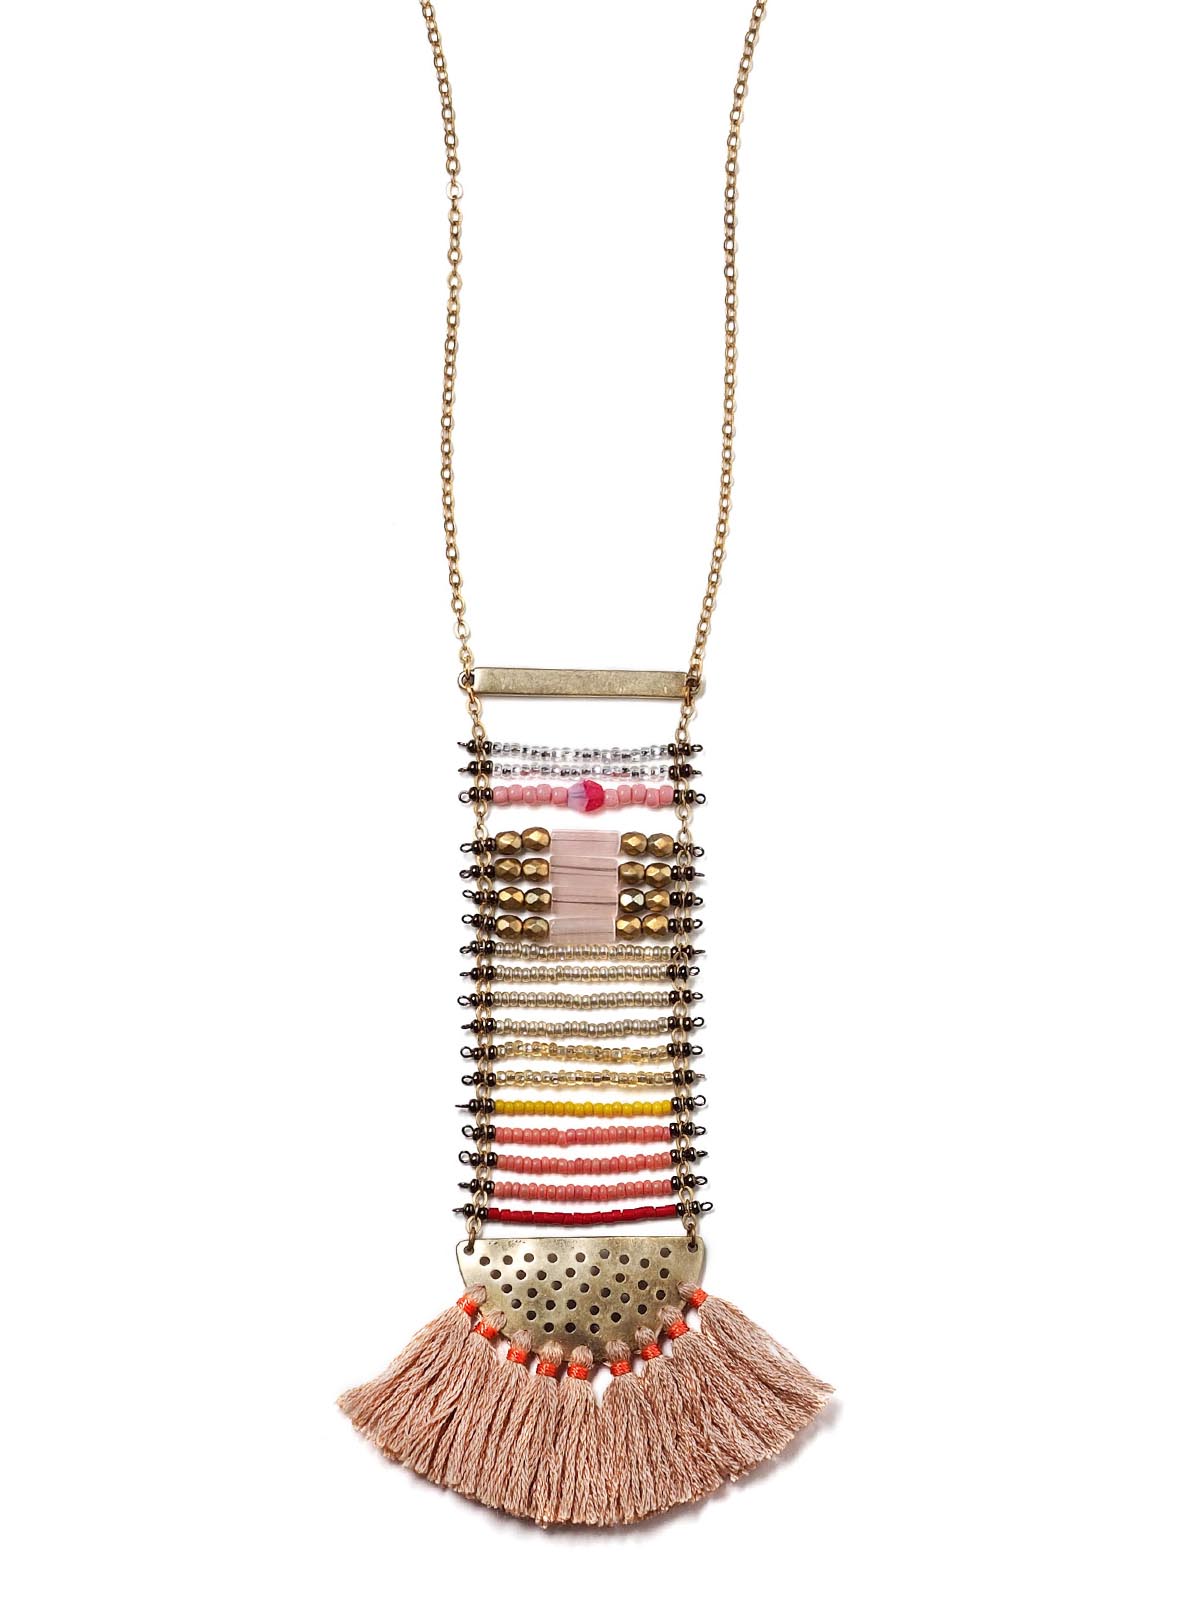 Beaded Ladder Necklace